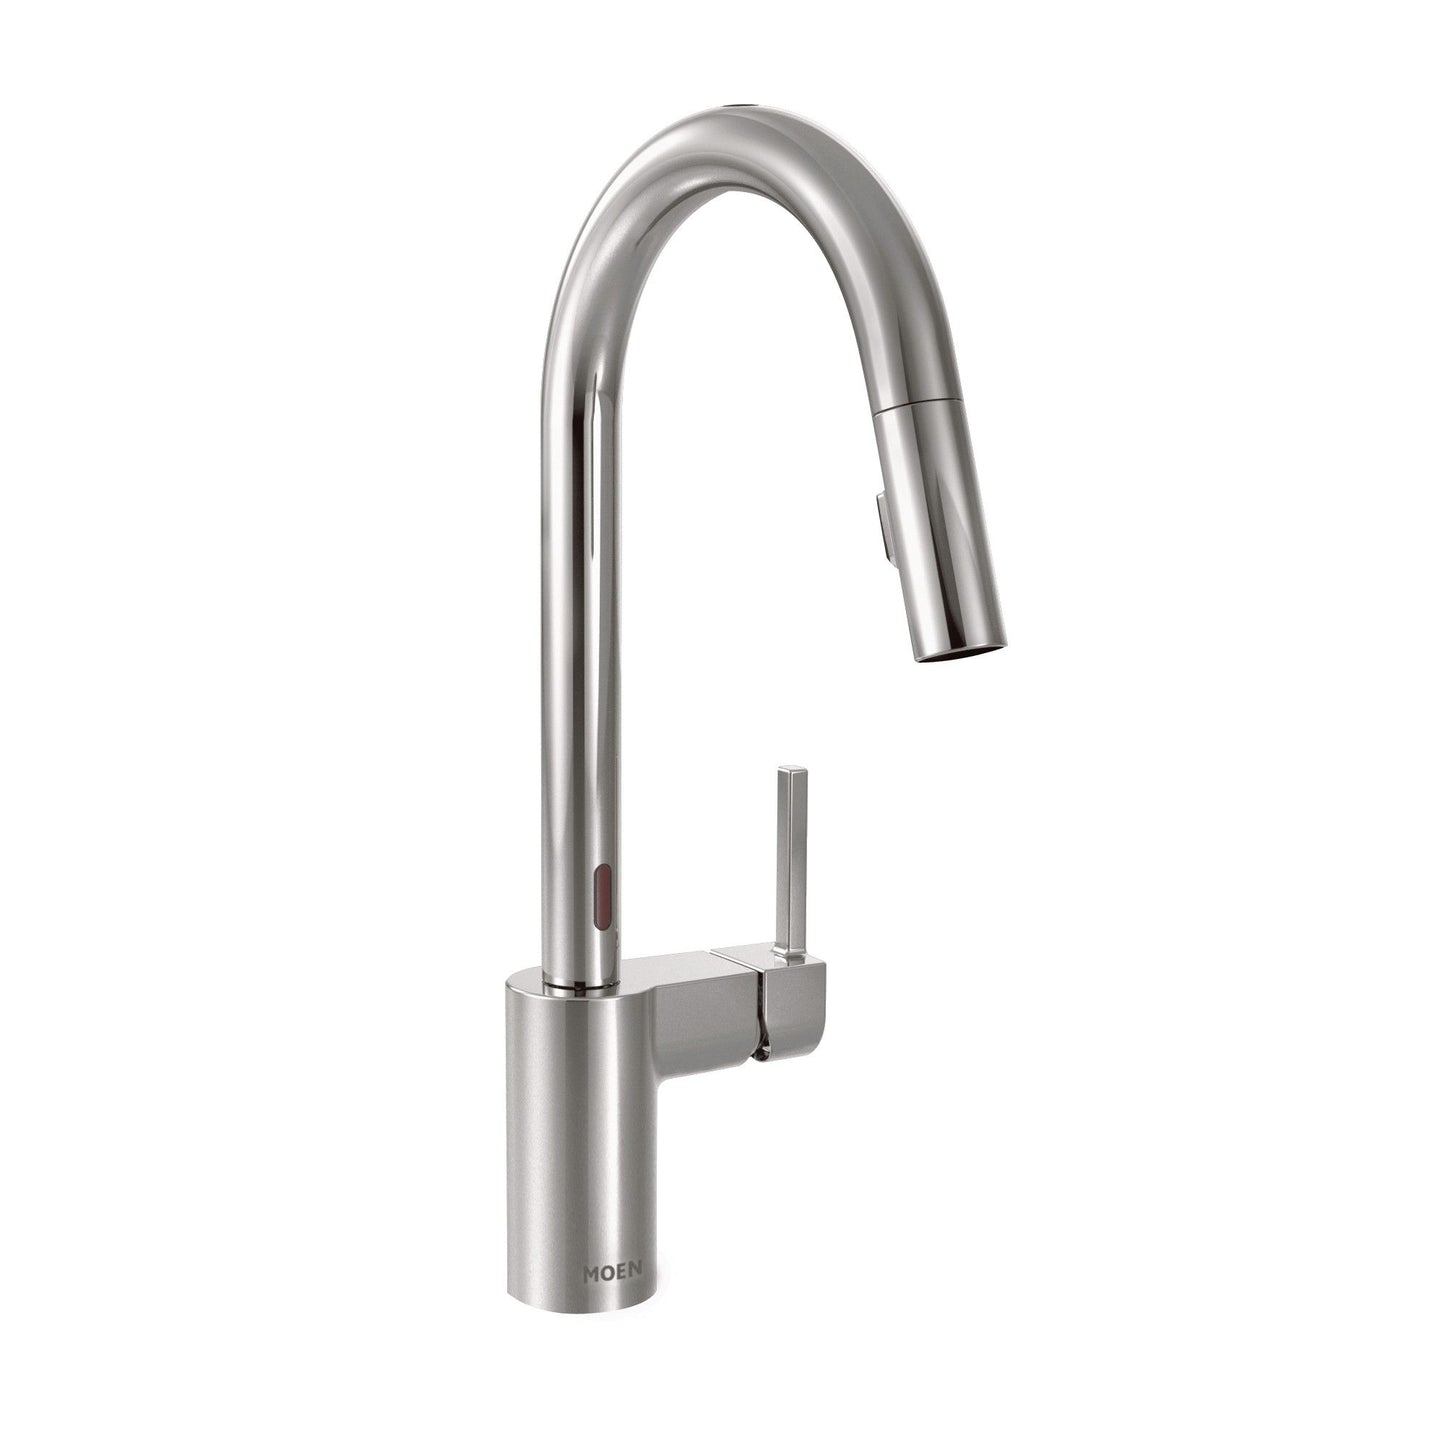 Align Touchless One-Handle High Arc Pulldown Kitchen Faucet